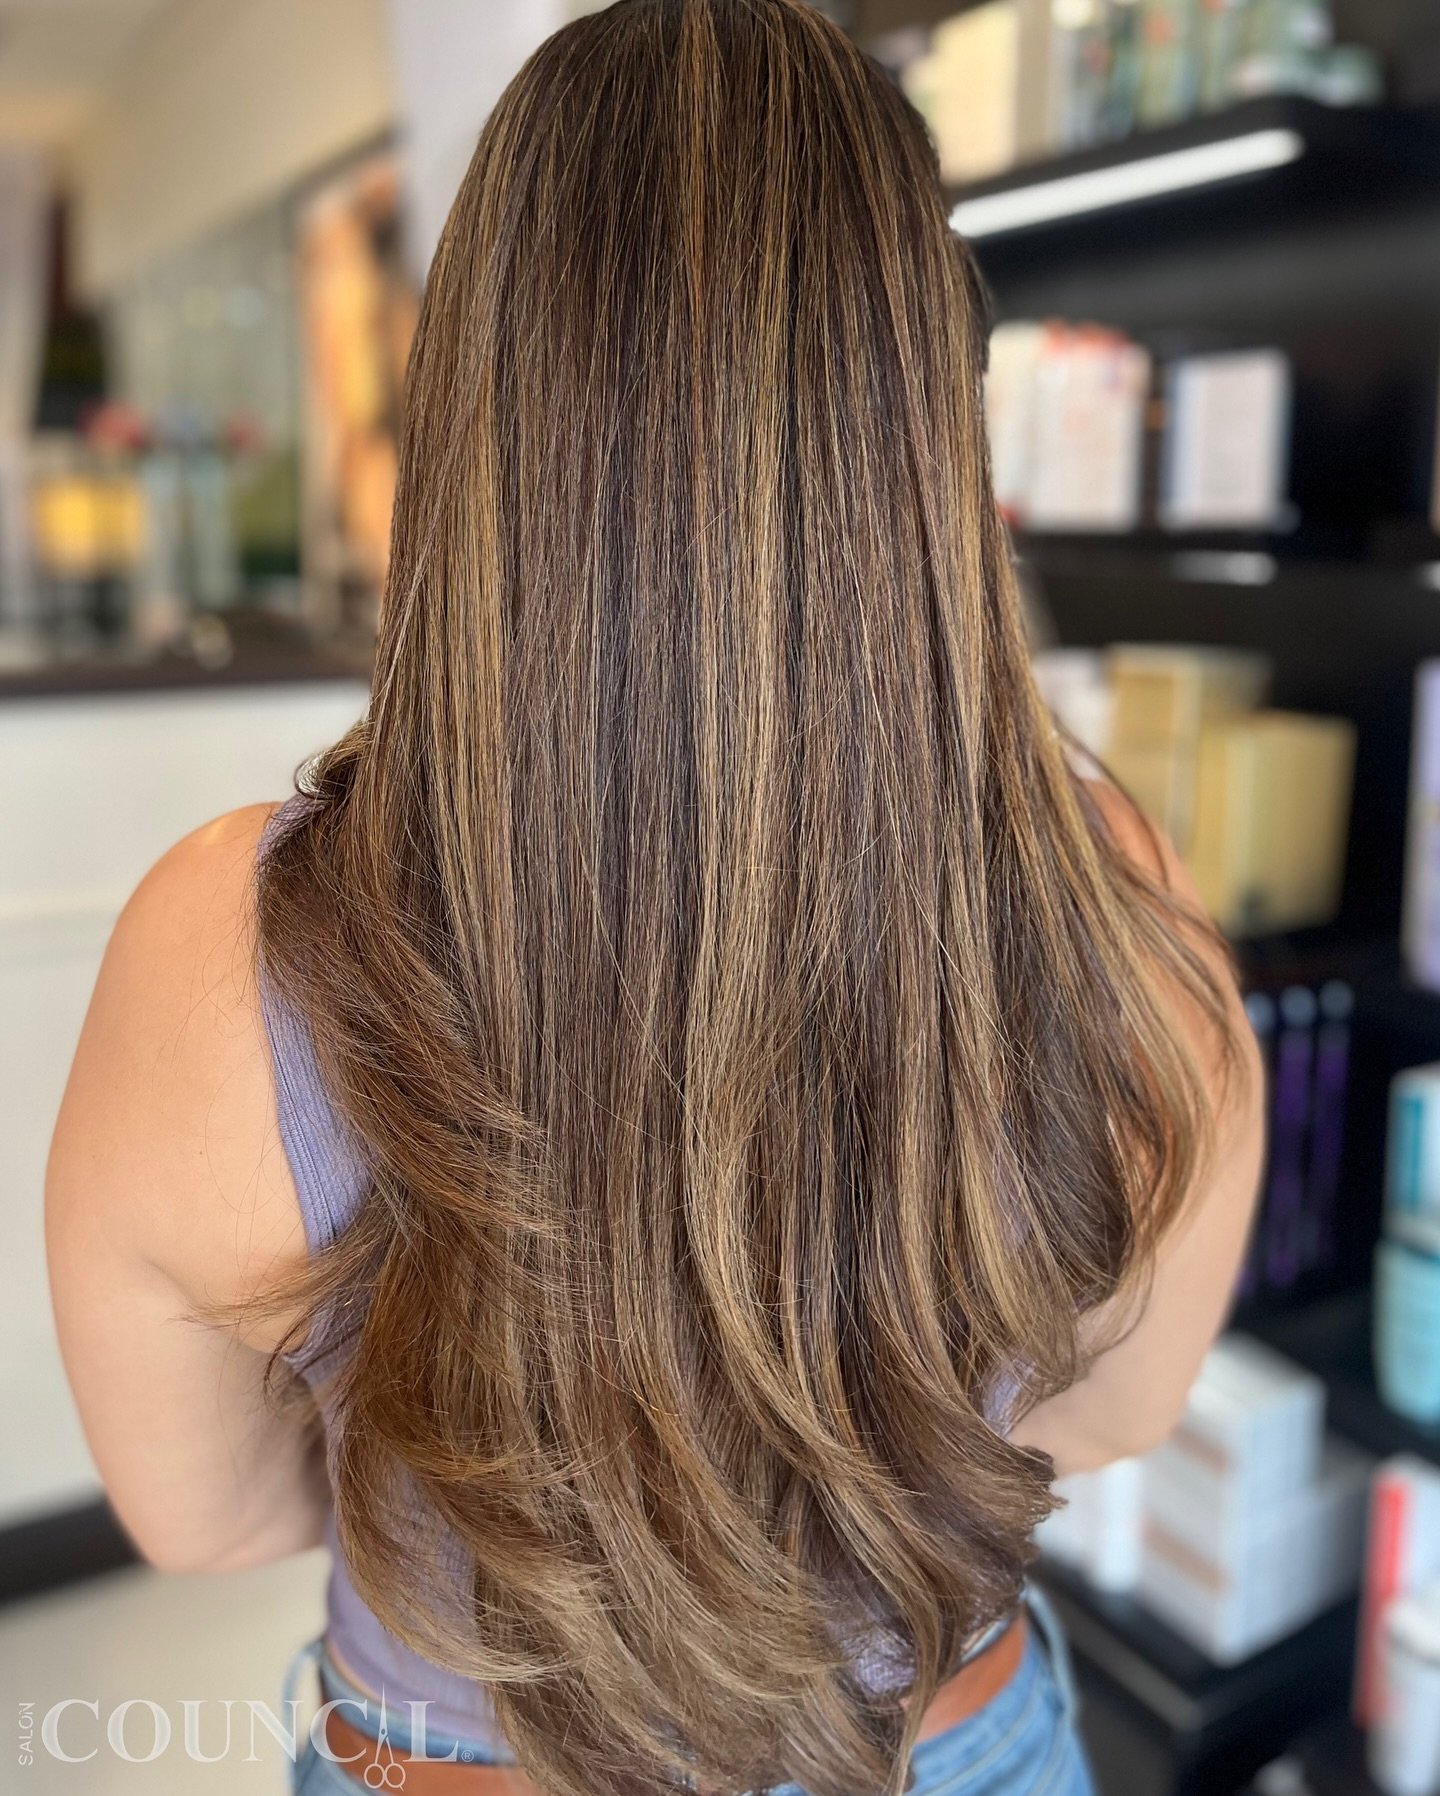 🌿#honeycaramelbalayage 
Sunkissed and stunning! 🌟 Rocking a honey caramel dimensional balayage, perfected with toner and Olaplex, and styled to turn heads. #BalayageBeauty #HairGoals

Hair by YARI @yarihair_styles 
@saloncouncilpines @saloncouncilw